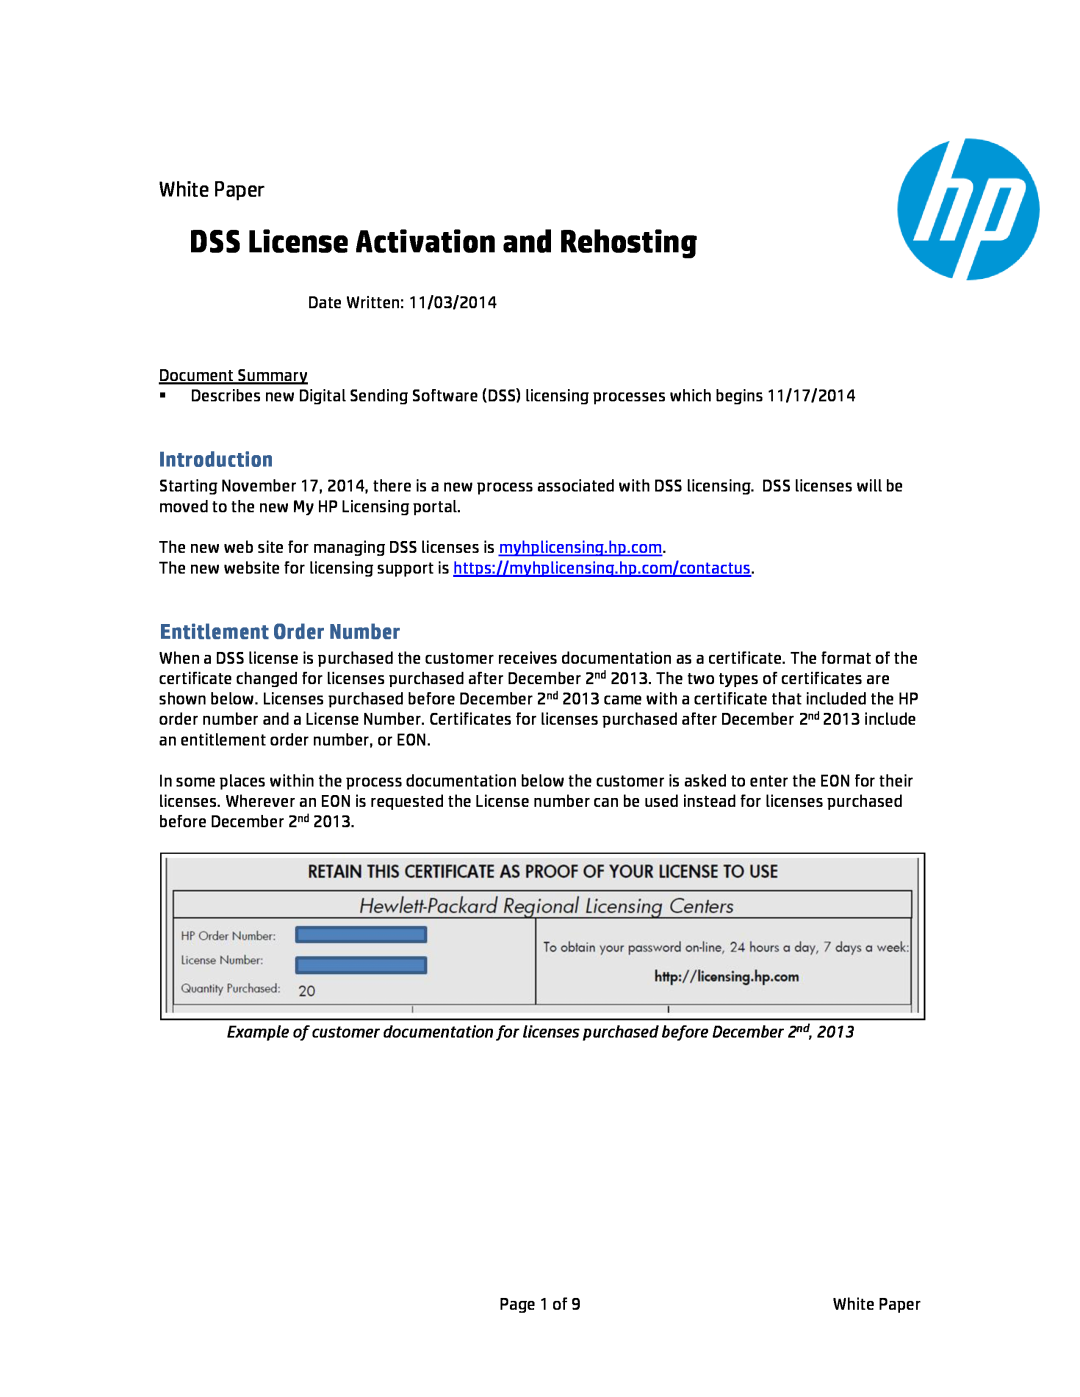 HP MFP Sending Software 4.25 manual Introduction, Definitions, HP Digital Sending white paperSoftware Upgrading from DSS 